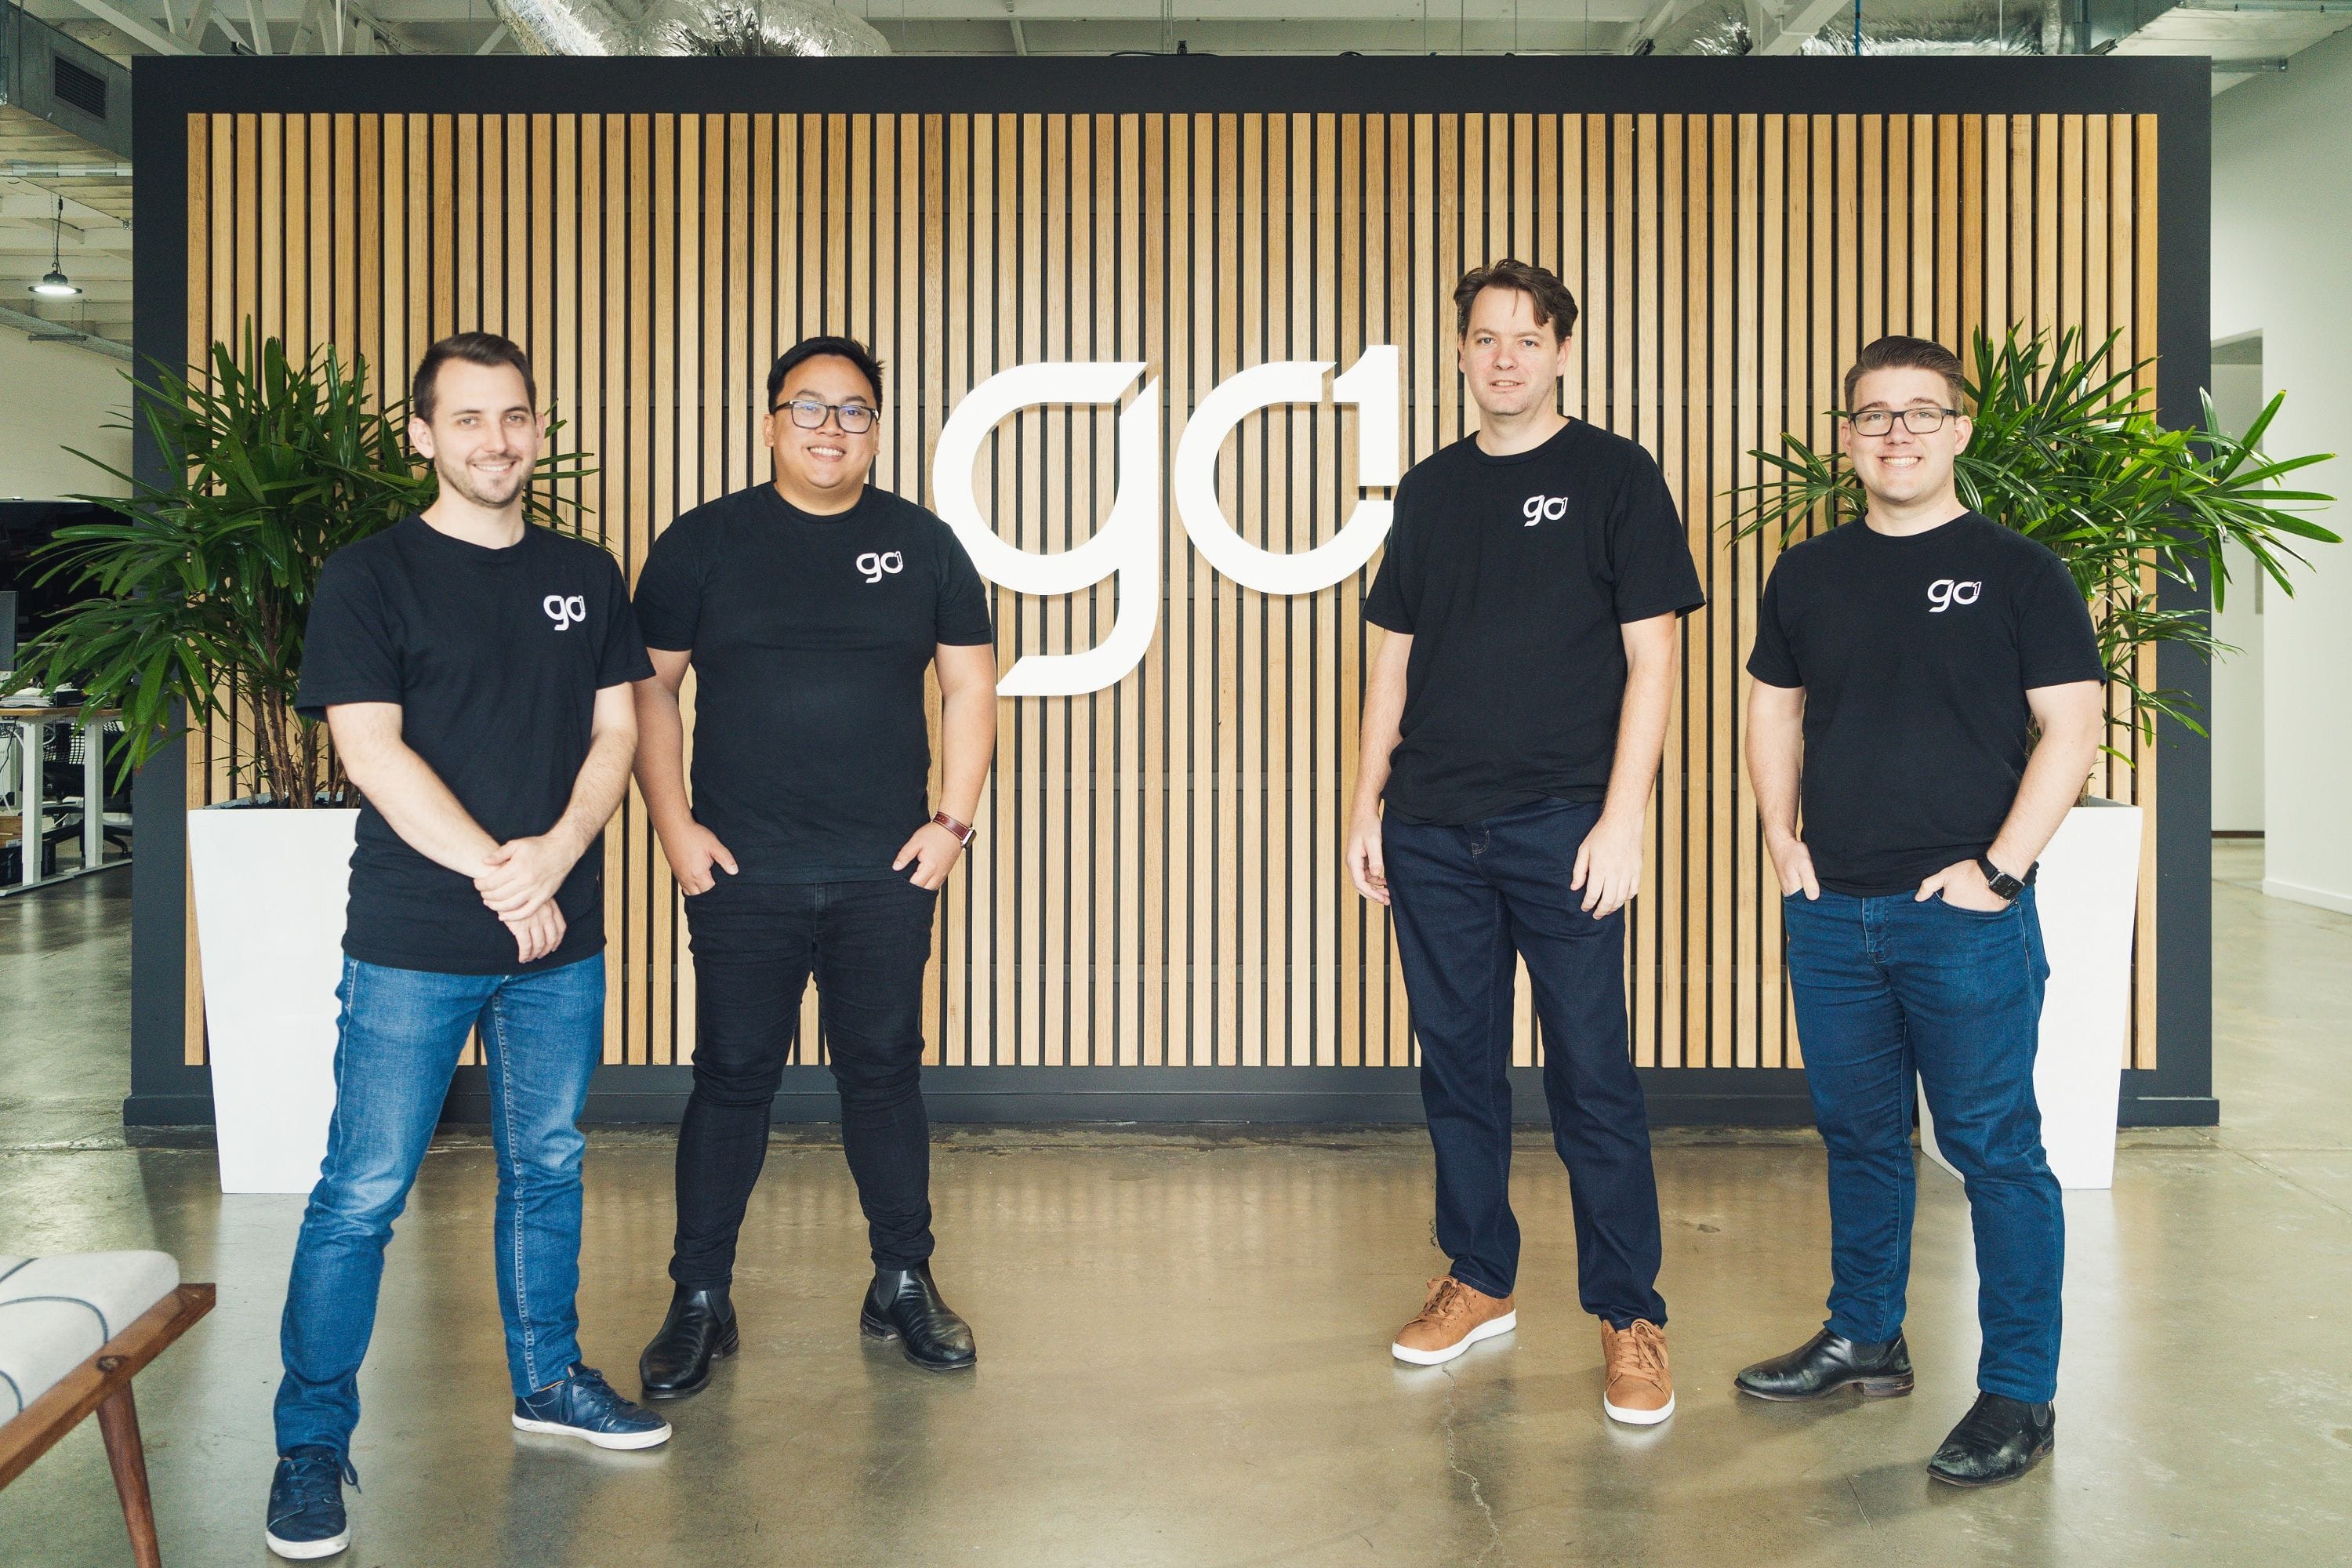 Go1 founders win Brisbane Young Entrepreneur of the Year Award after decade-long wait